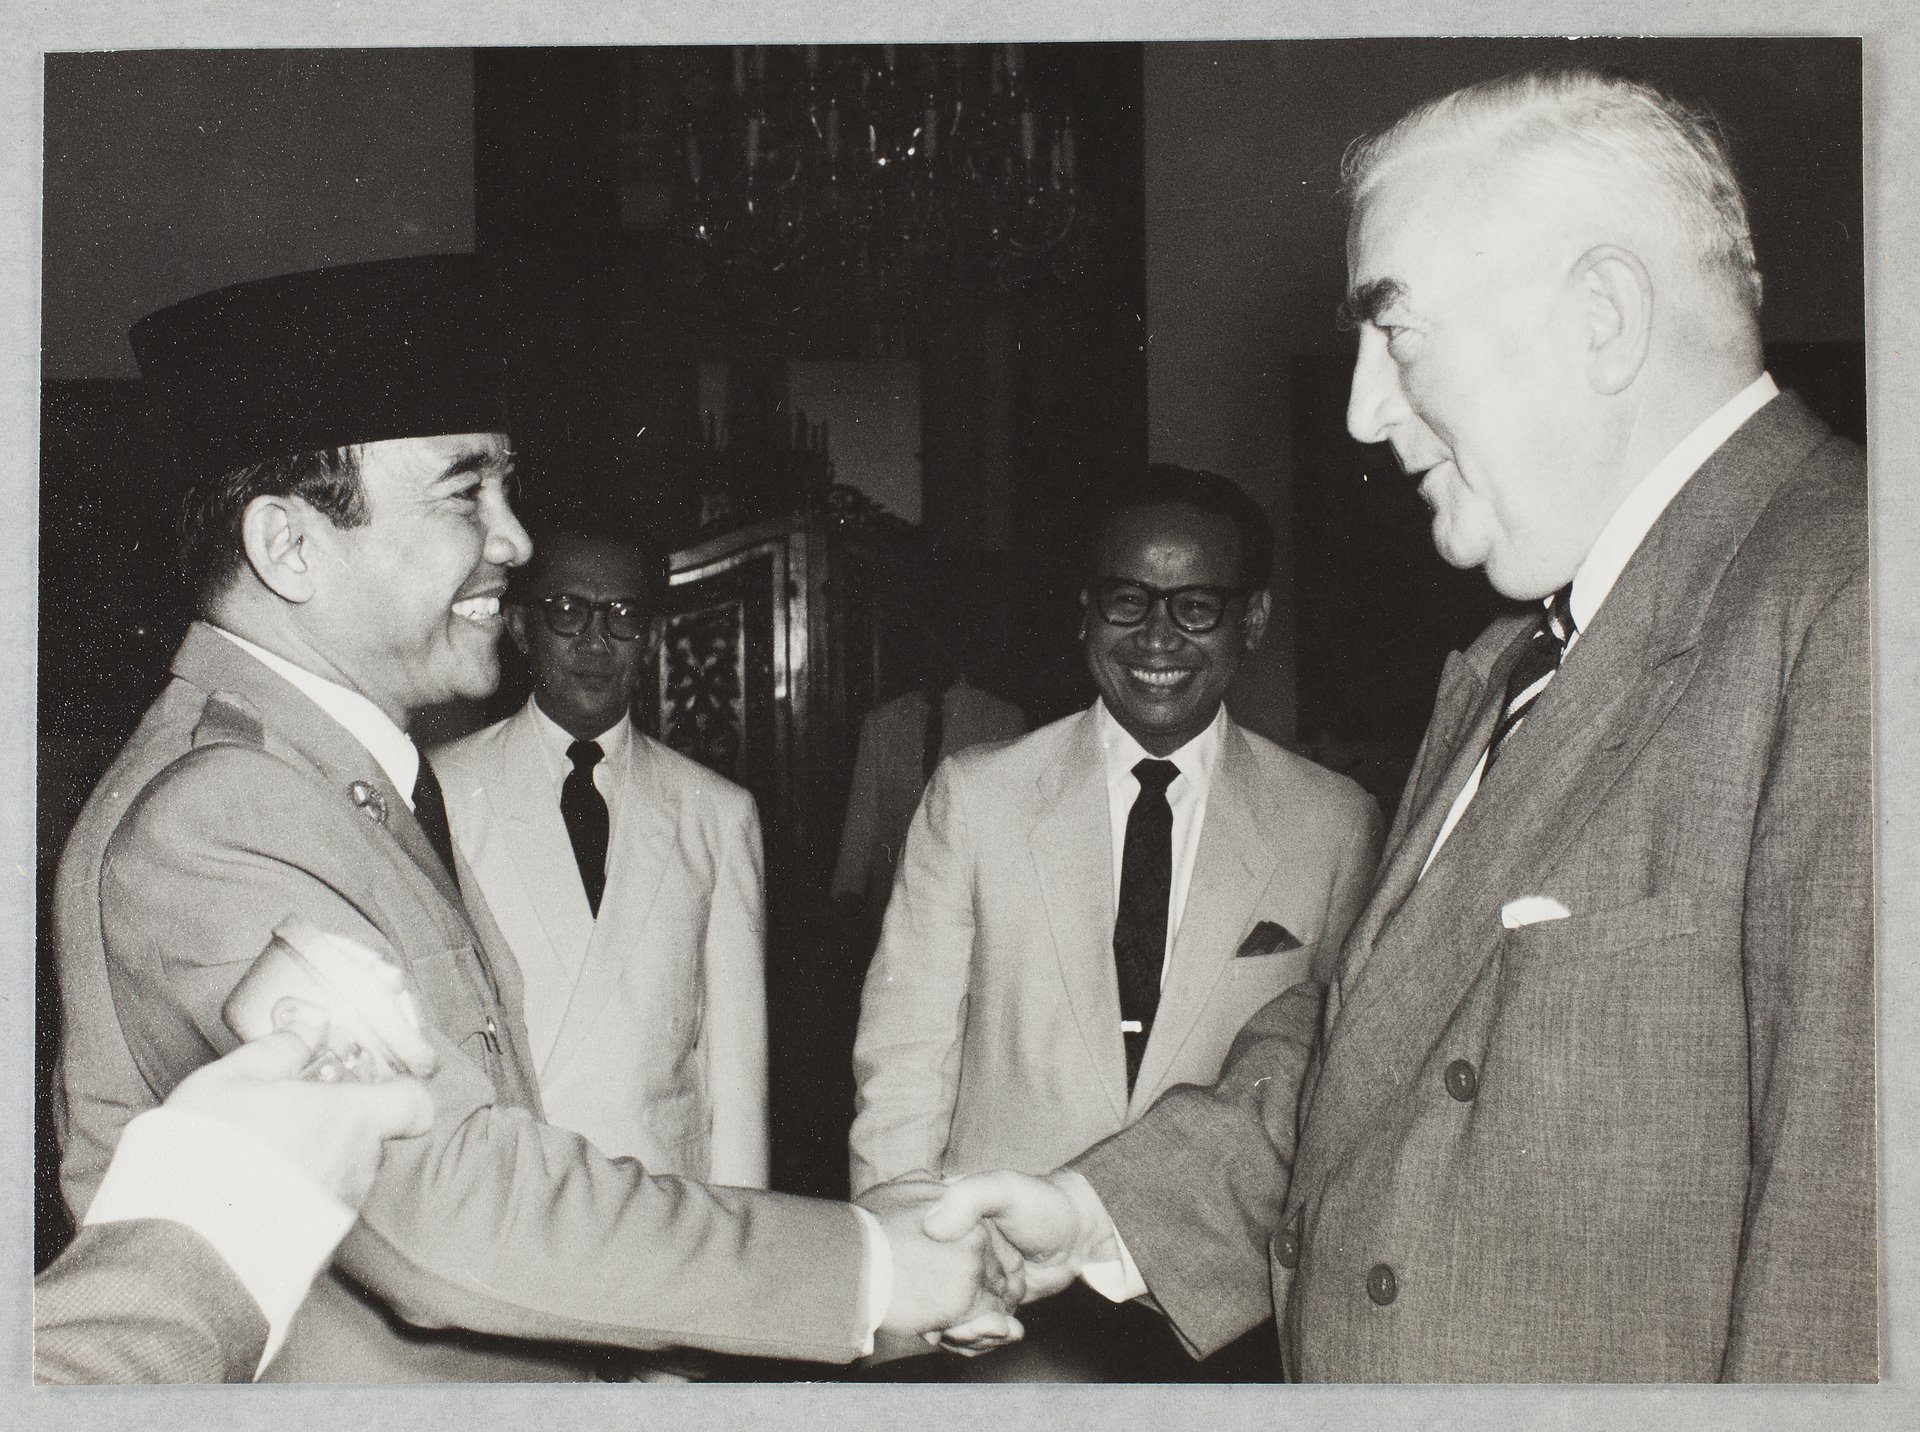 President Sukarno of Indonesia shaking hands with Robert Menzies during Menzies' visit to Indonesia in 1959